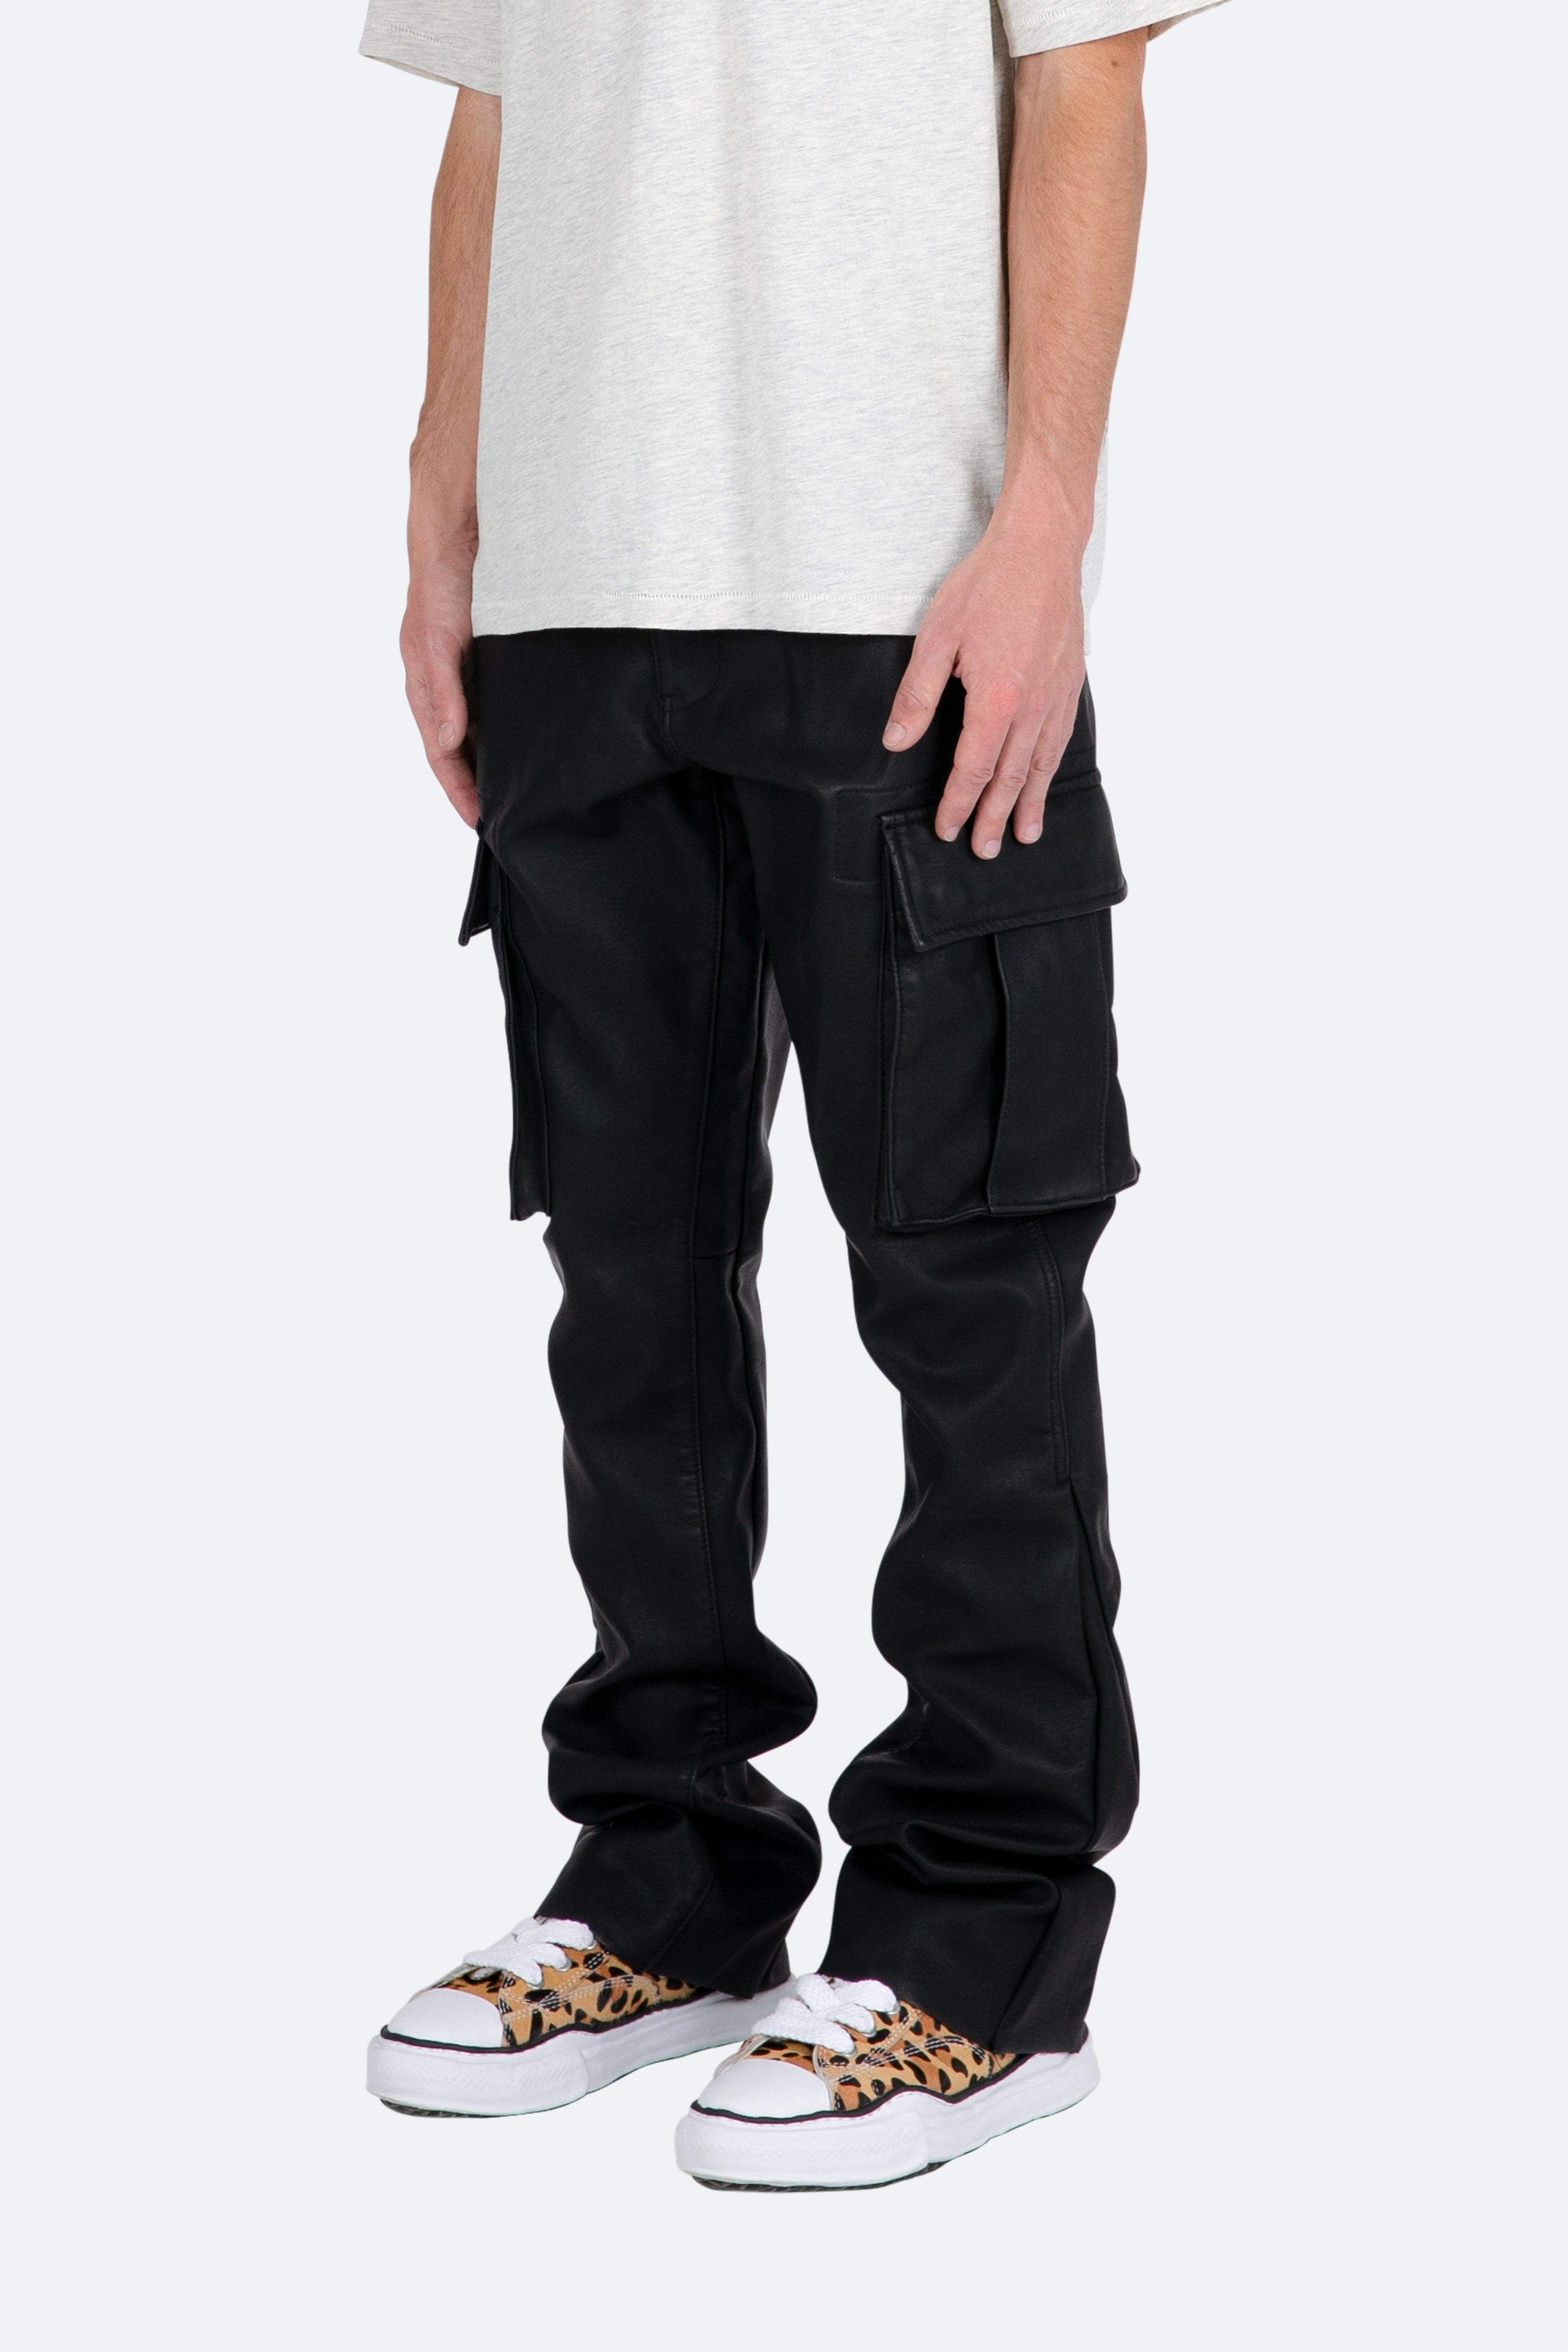 MNML B449 Leather Cargo Flare Pants in Black for Men | Lyst